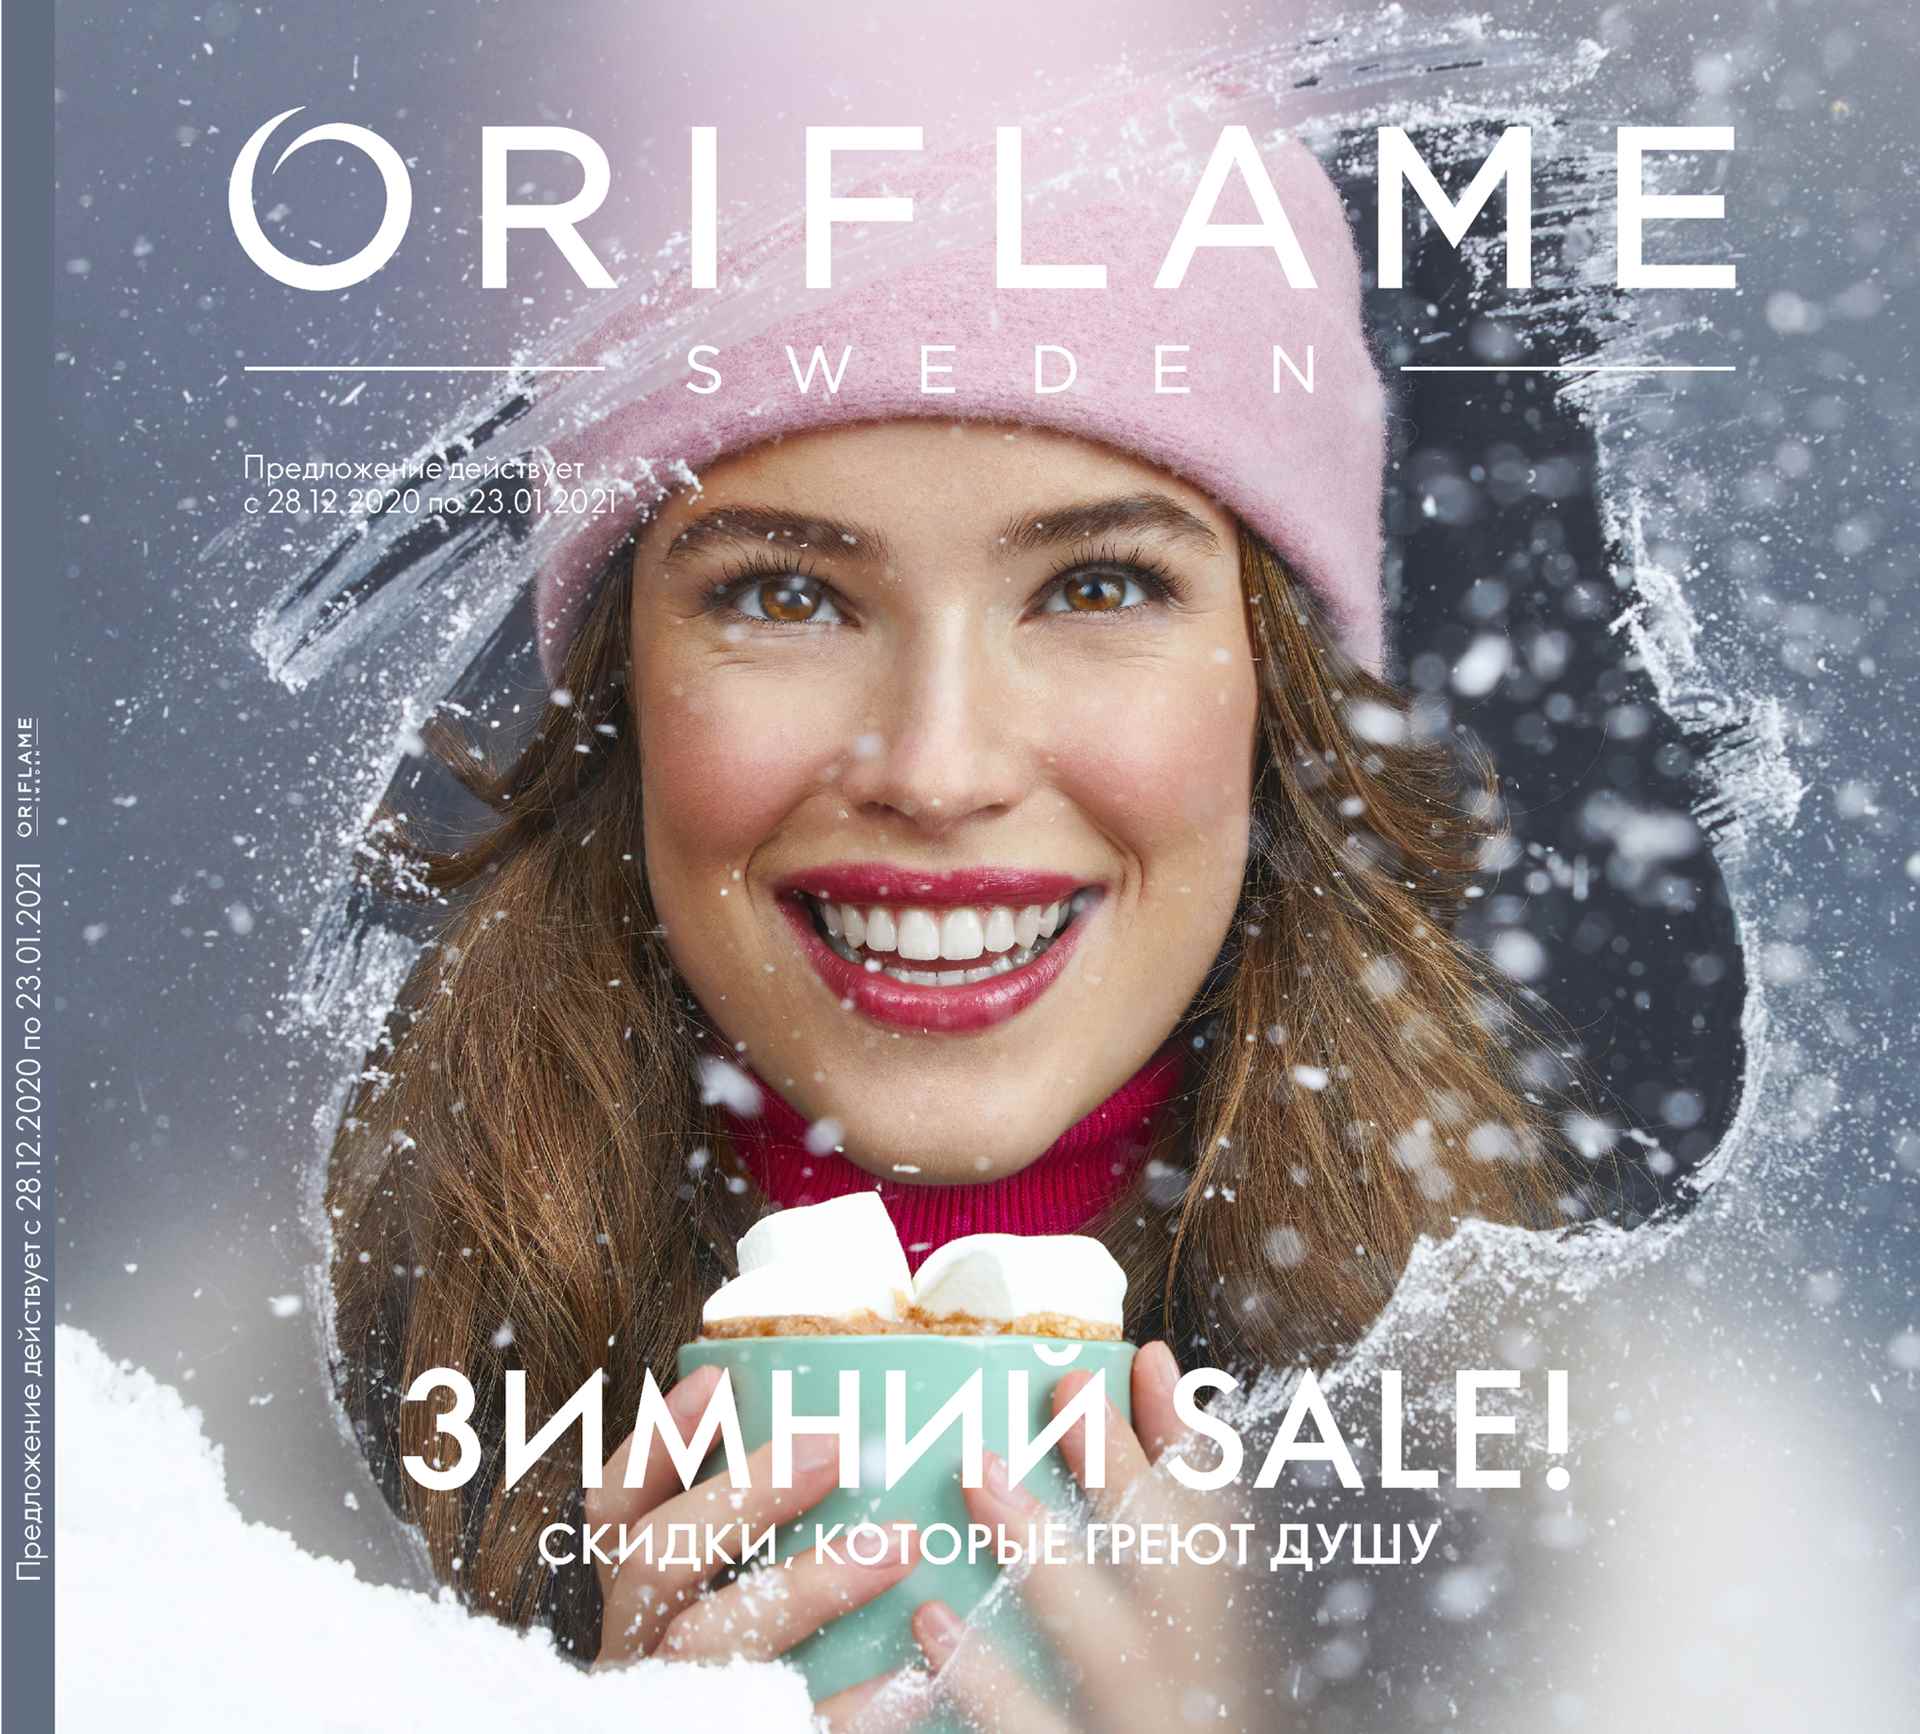    8.01.!     Oriflame!-1/21. 143  500, G.Gold 143  600, / 400 107,. 215  720,  201  490, /. 143   !13%